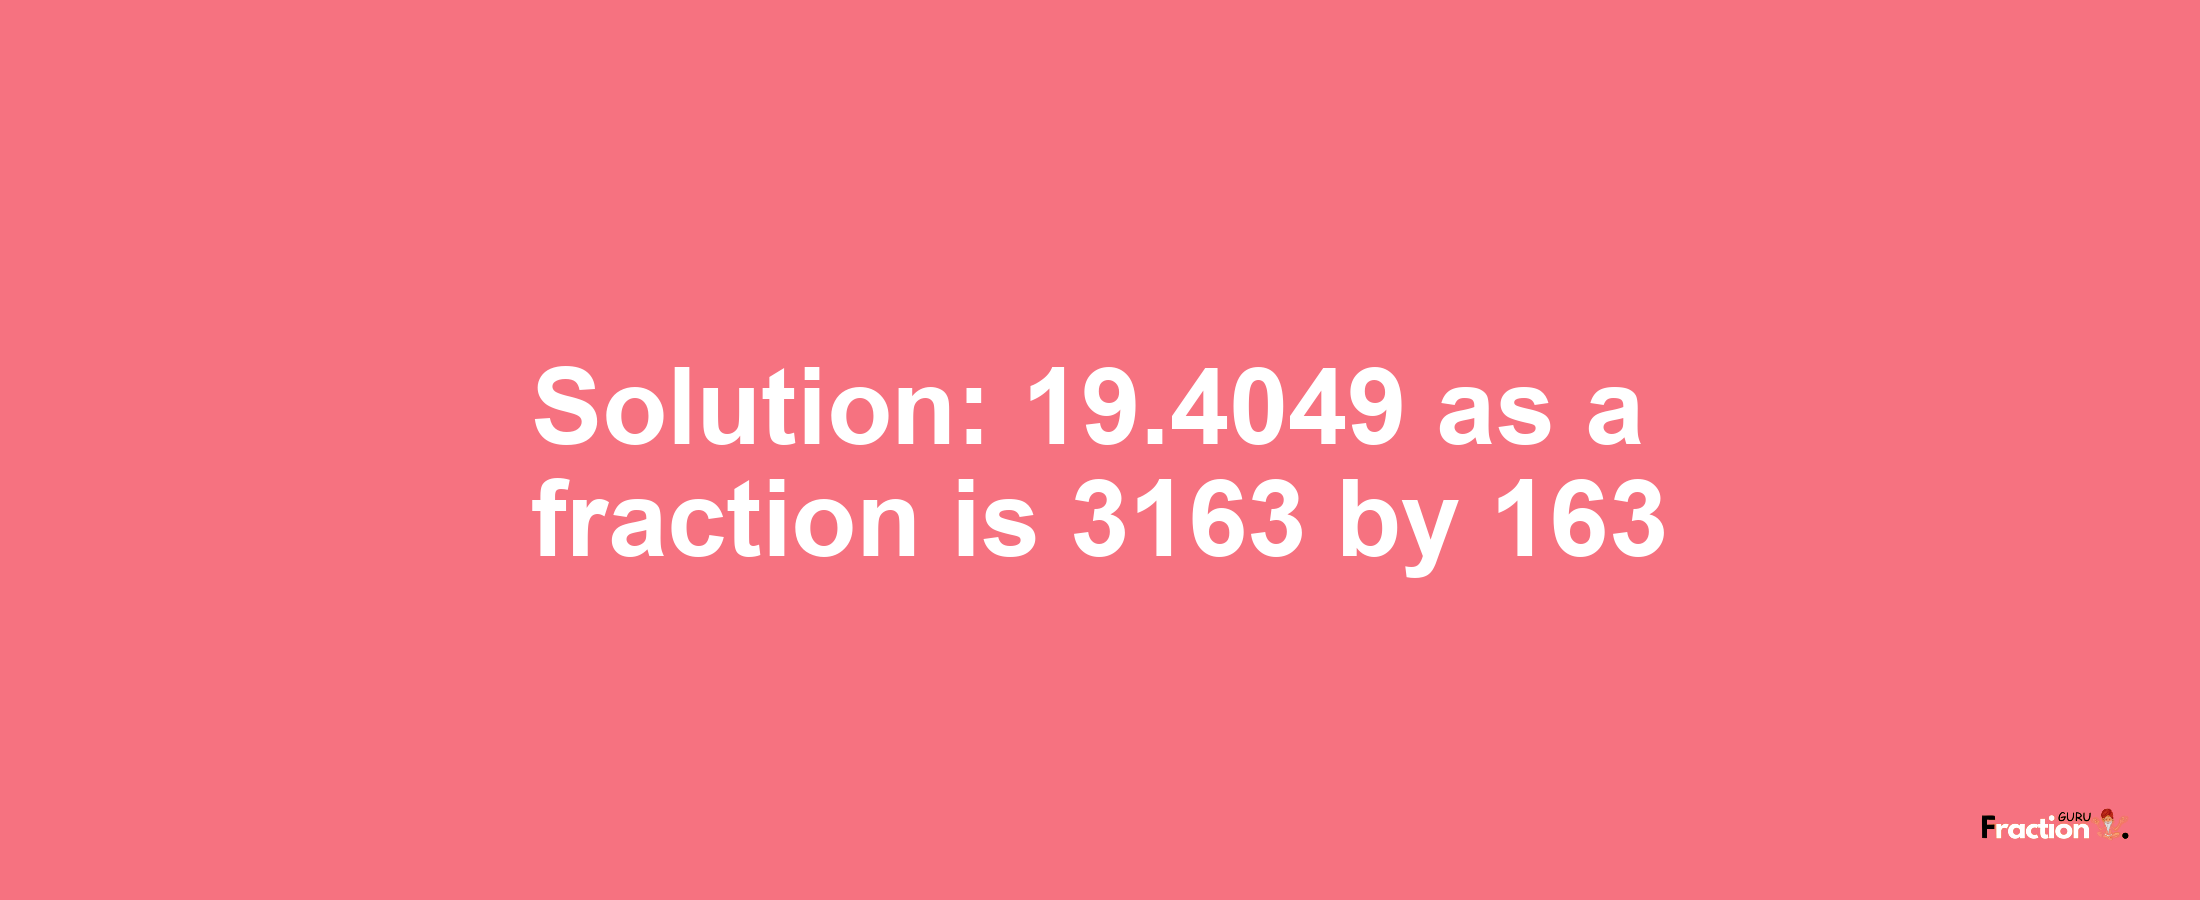 Solution:19.4049 as a fraction is 3163/163